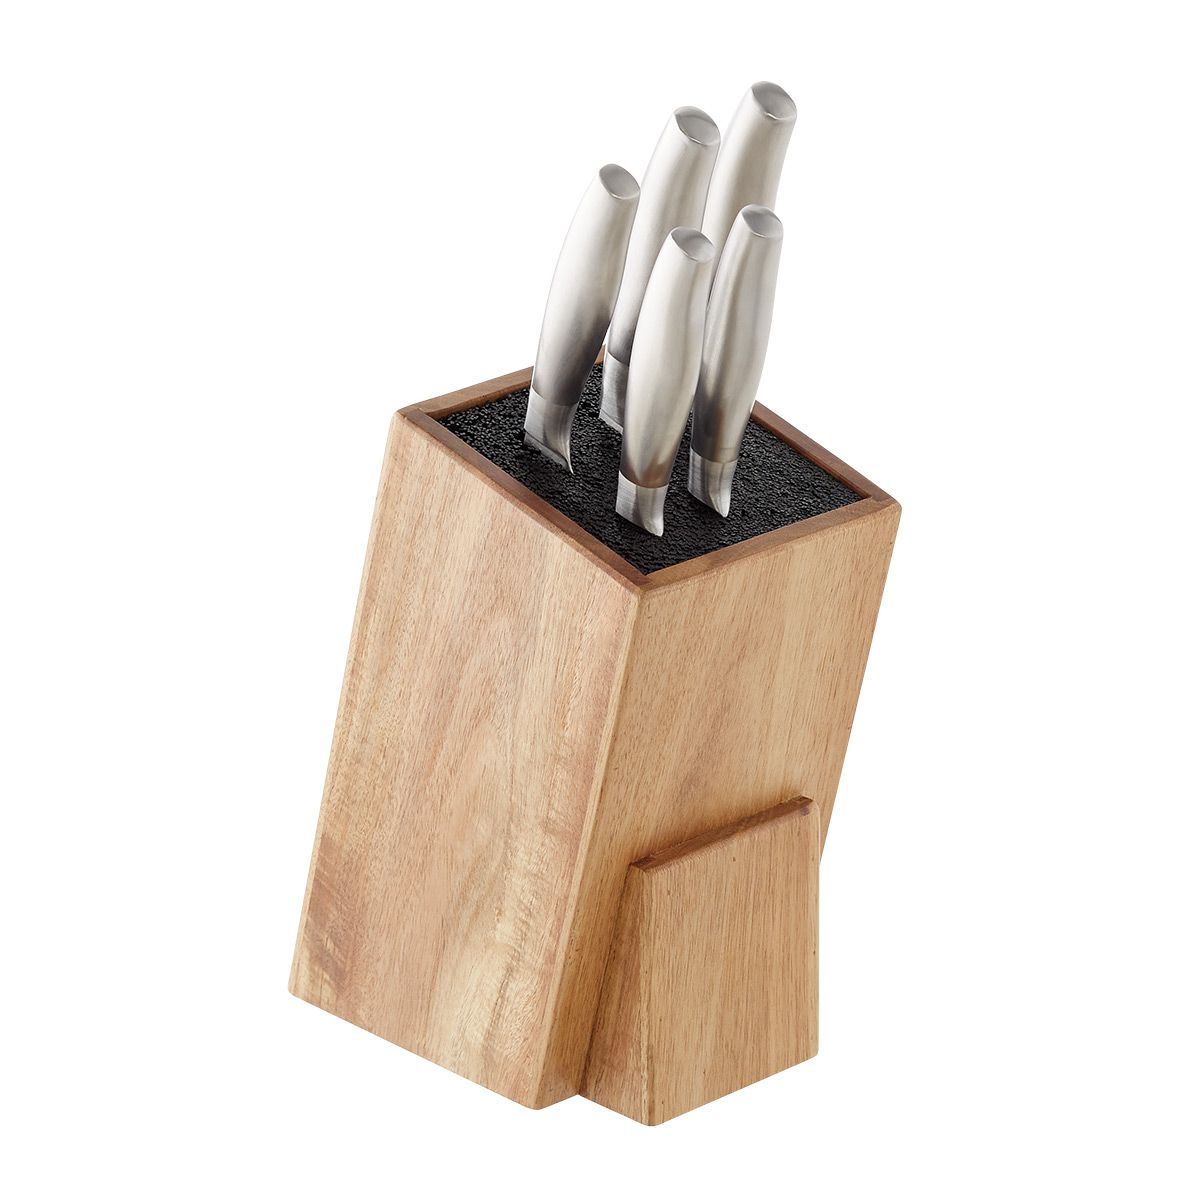 https://www.containerstore.com/catalogimages/392849/10081164-acacia-universal-knife-stor.jpg